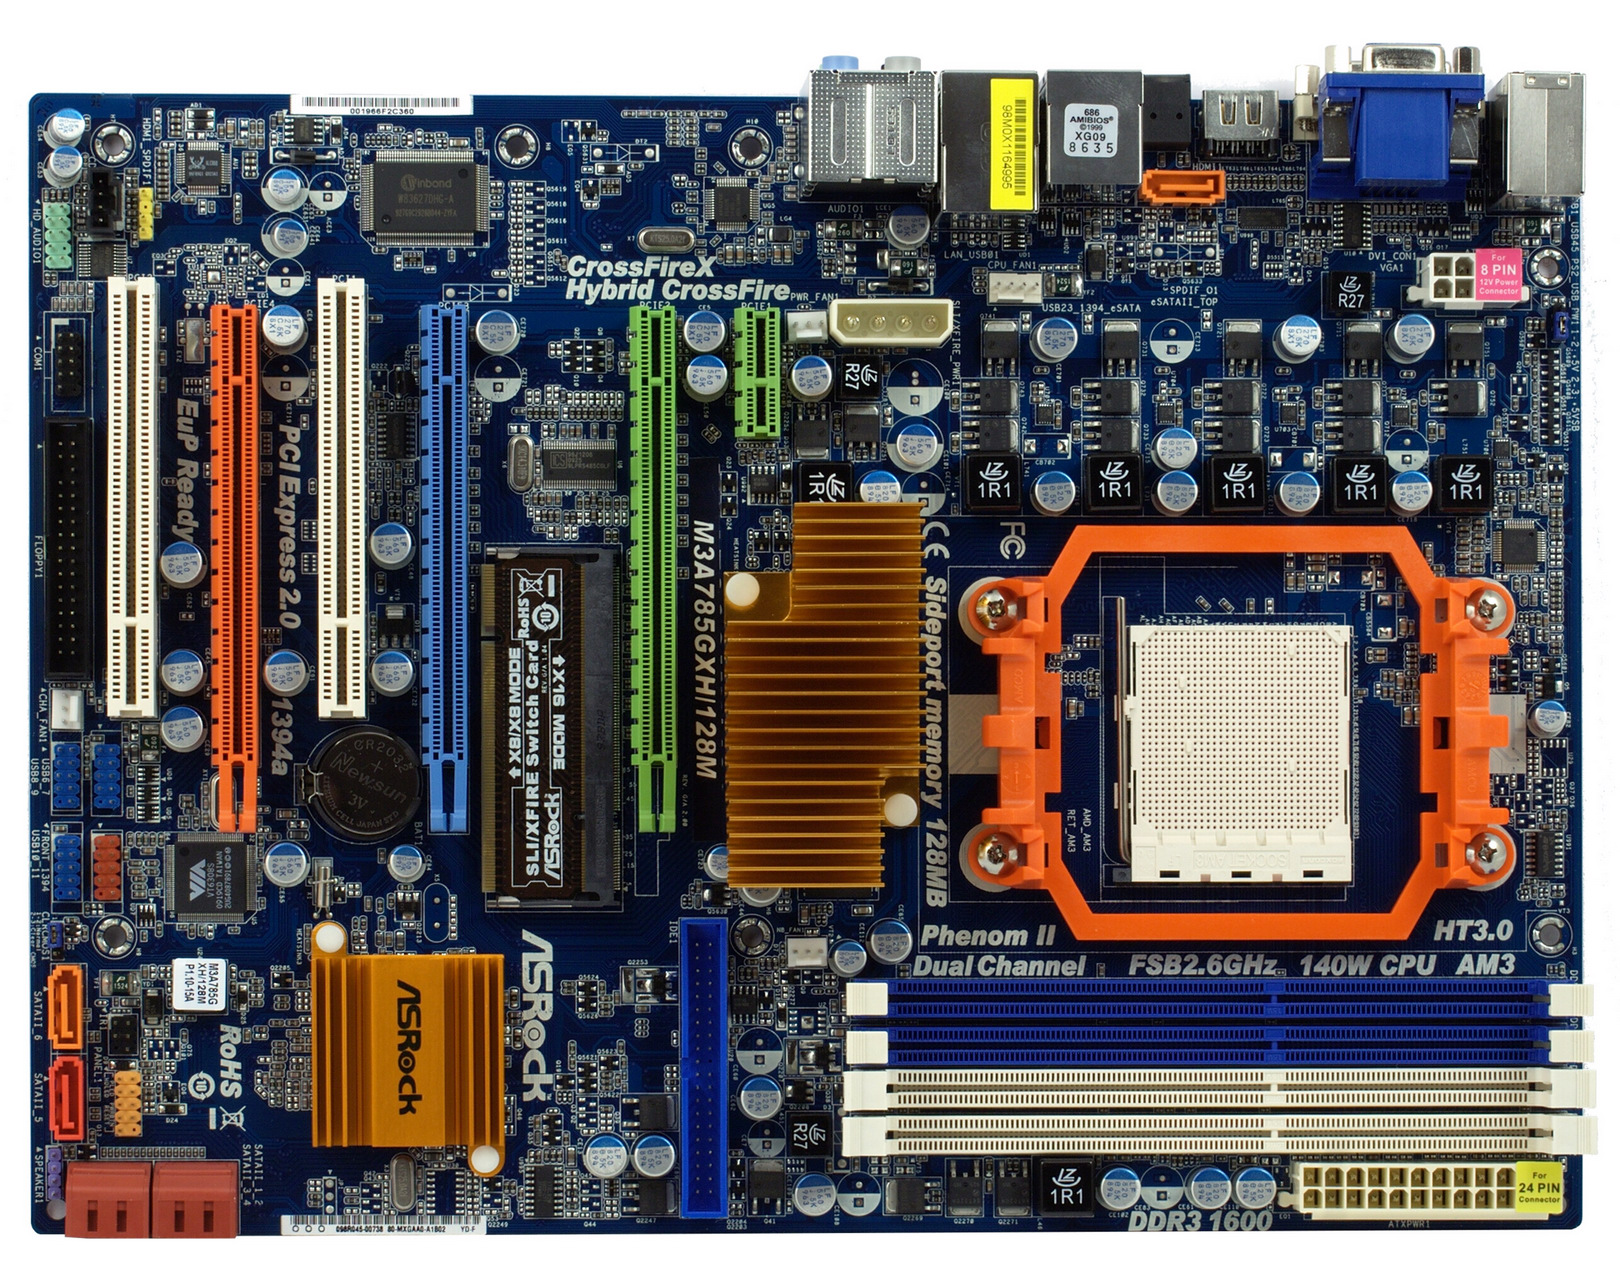 iXBT Labs - ASRock M3A785GXH/128M Motherboard - Page 1: Introduction